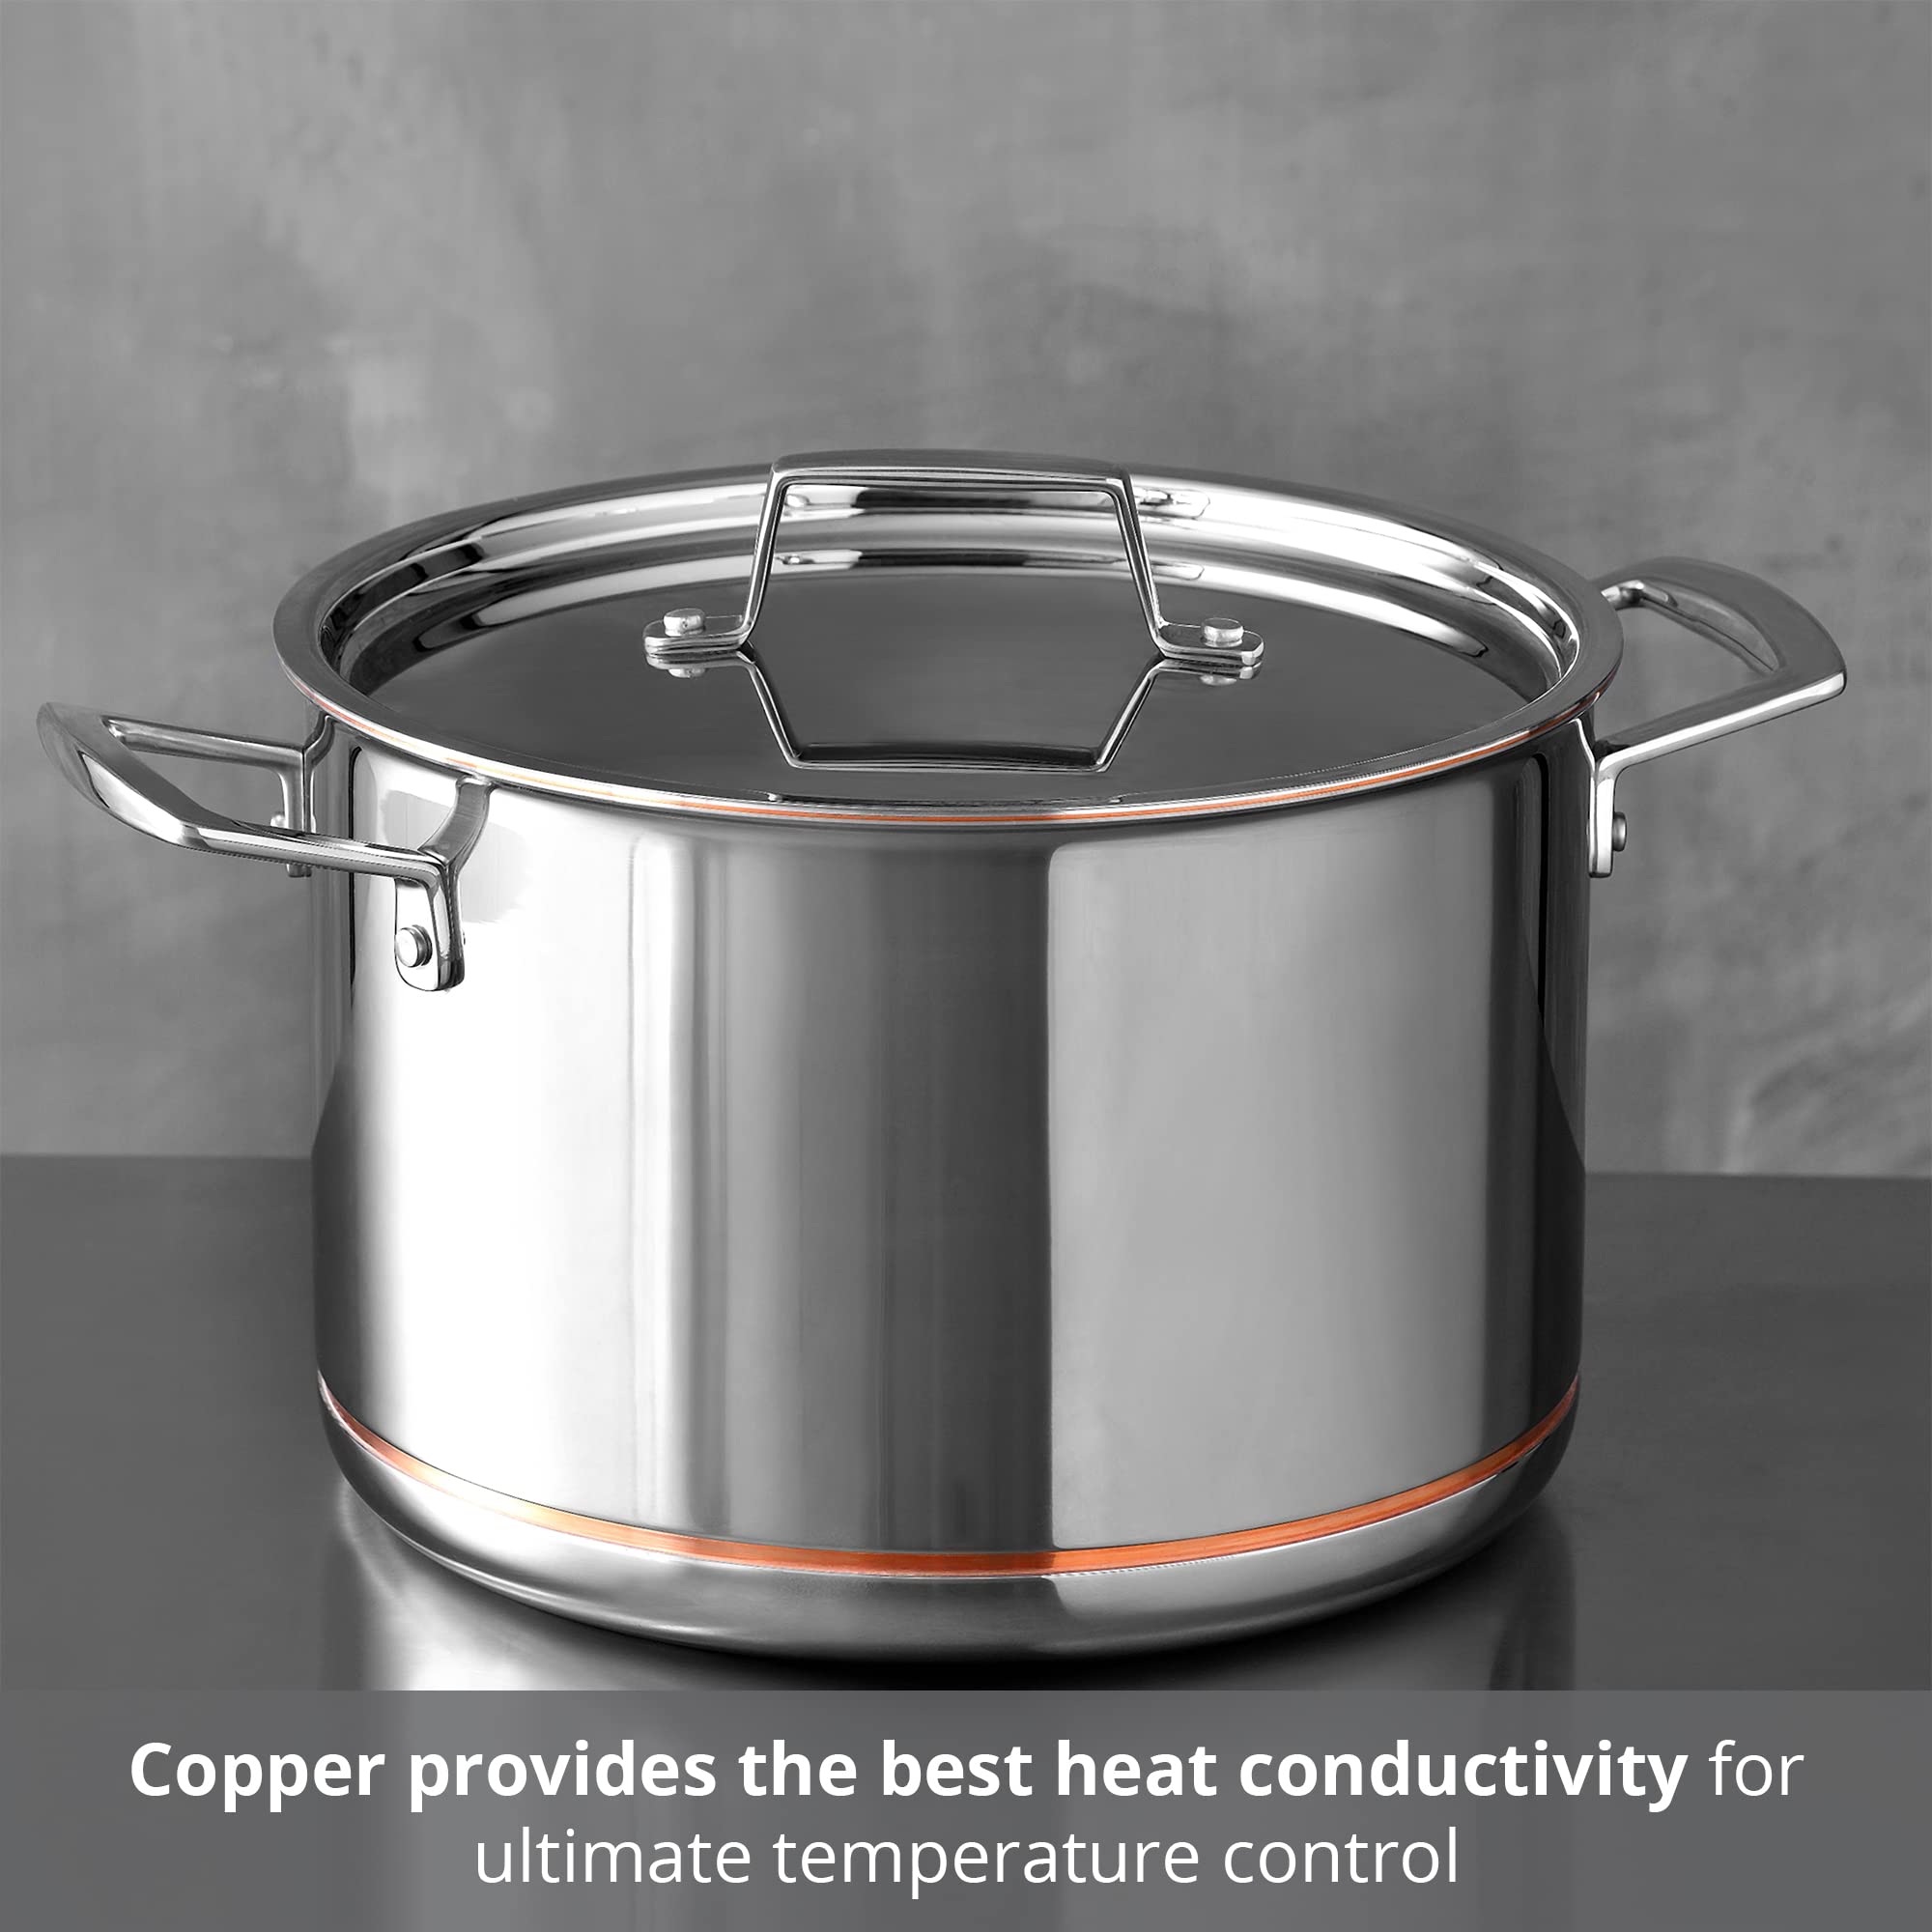 MasterPRO - Copper Core 5 Ply 8 Quart Stock Pot with Stainless Steel Lid - Stainless Steel, Aluminum, Durable Cookware Compatible with All Stove Types Including Induction - Dishwasher Safe